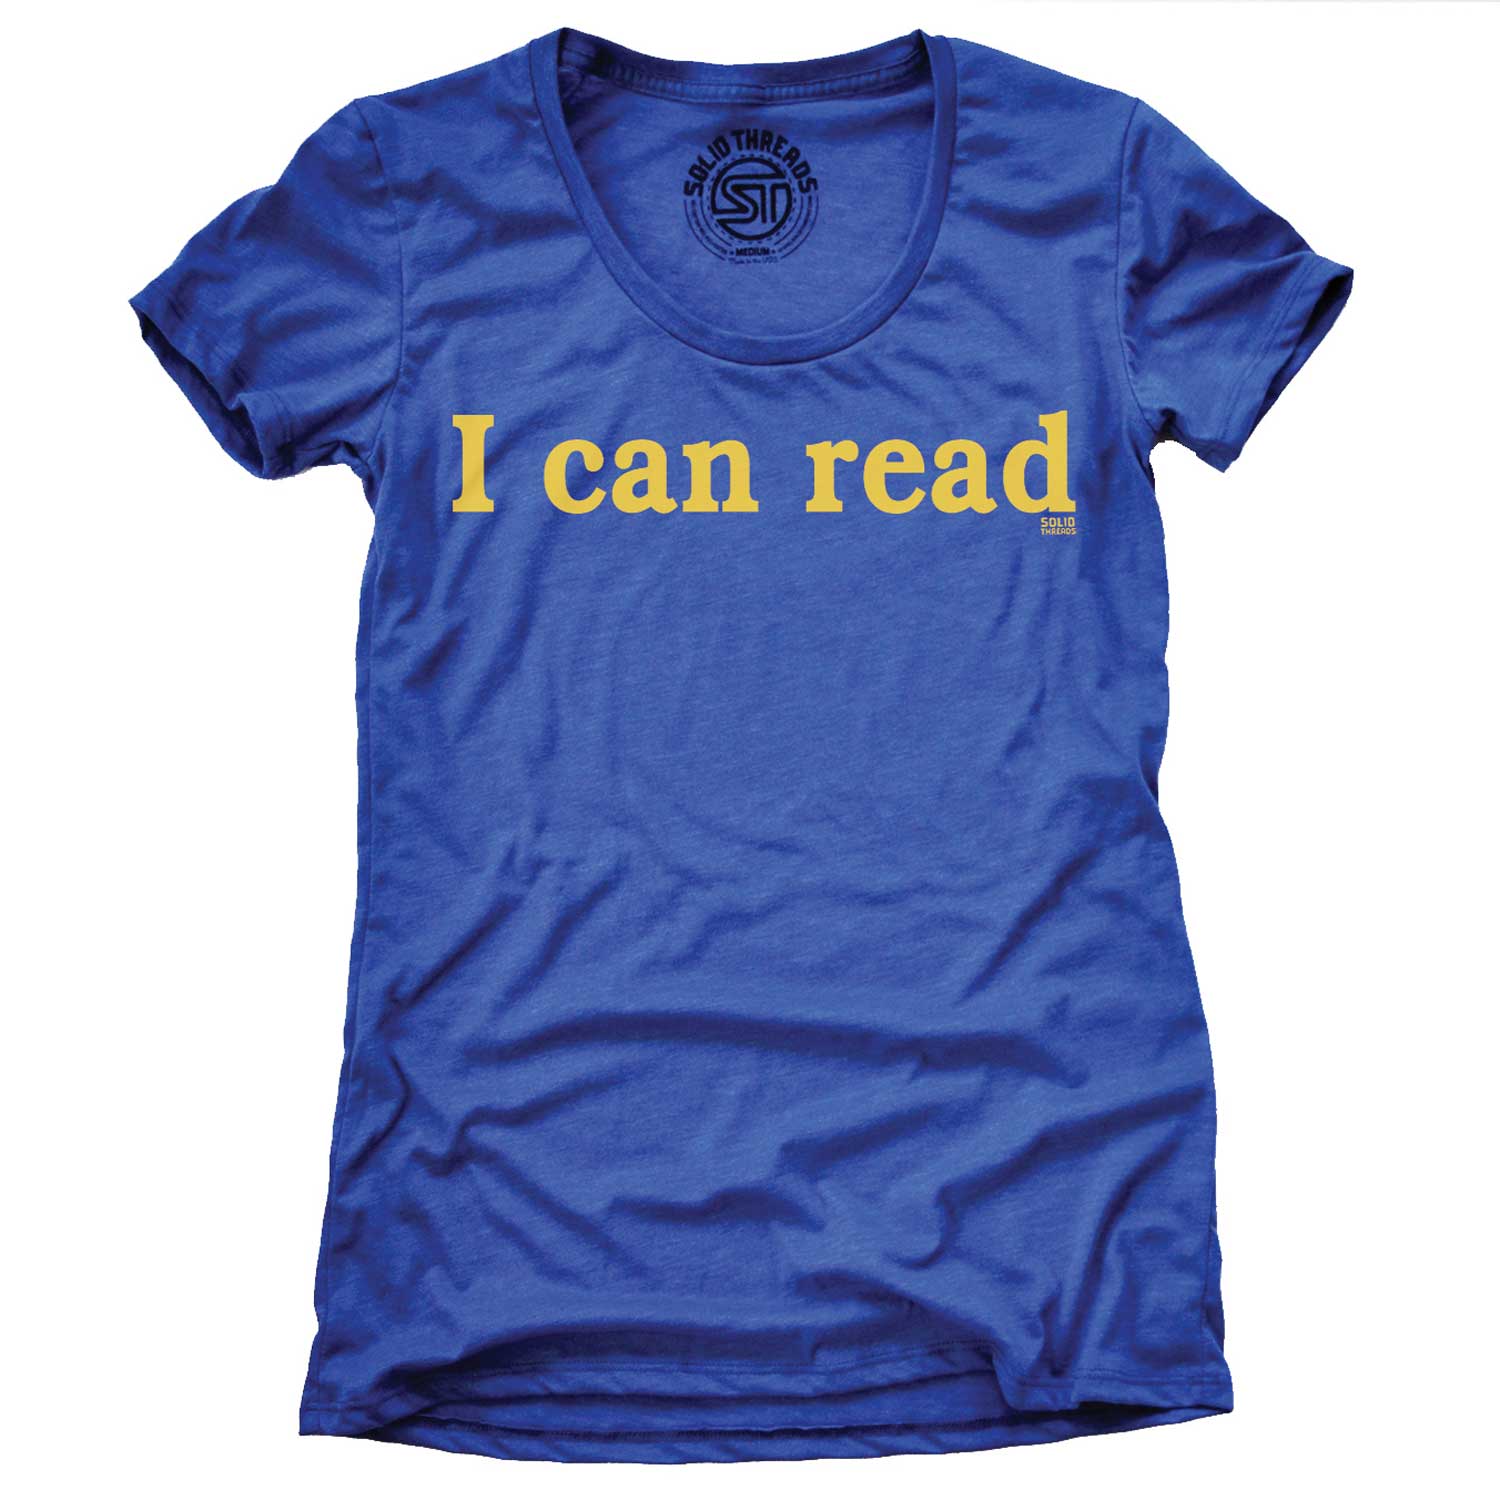 Women's I Can Read Funny Nerdy Stoner Graphic T-Shirt | Vintage Bookworm Tee | Solid Threads